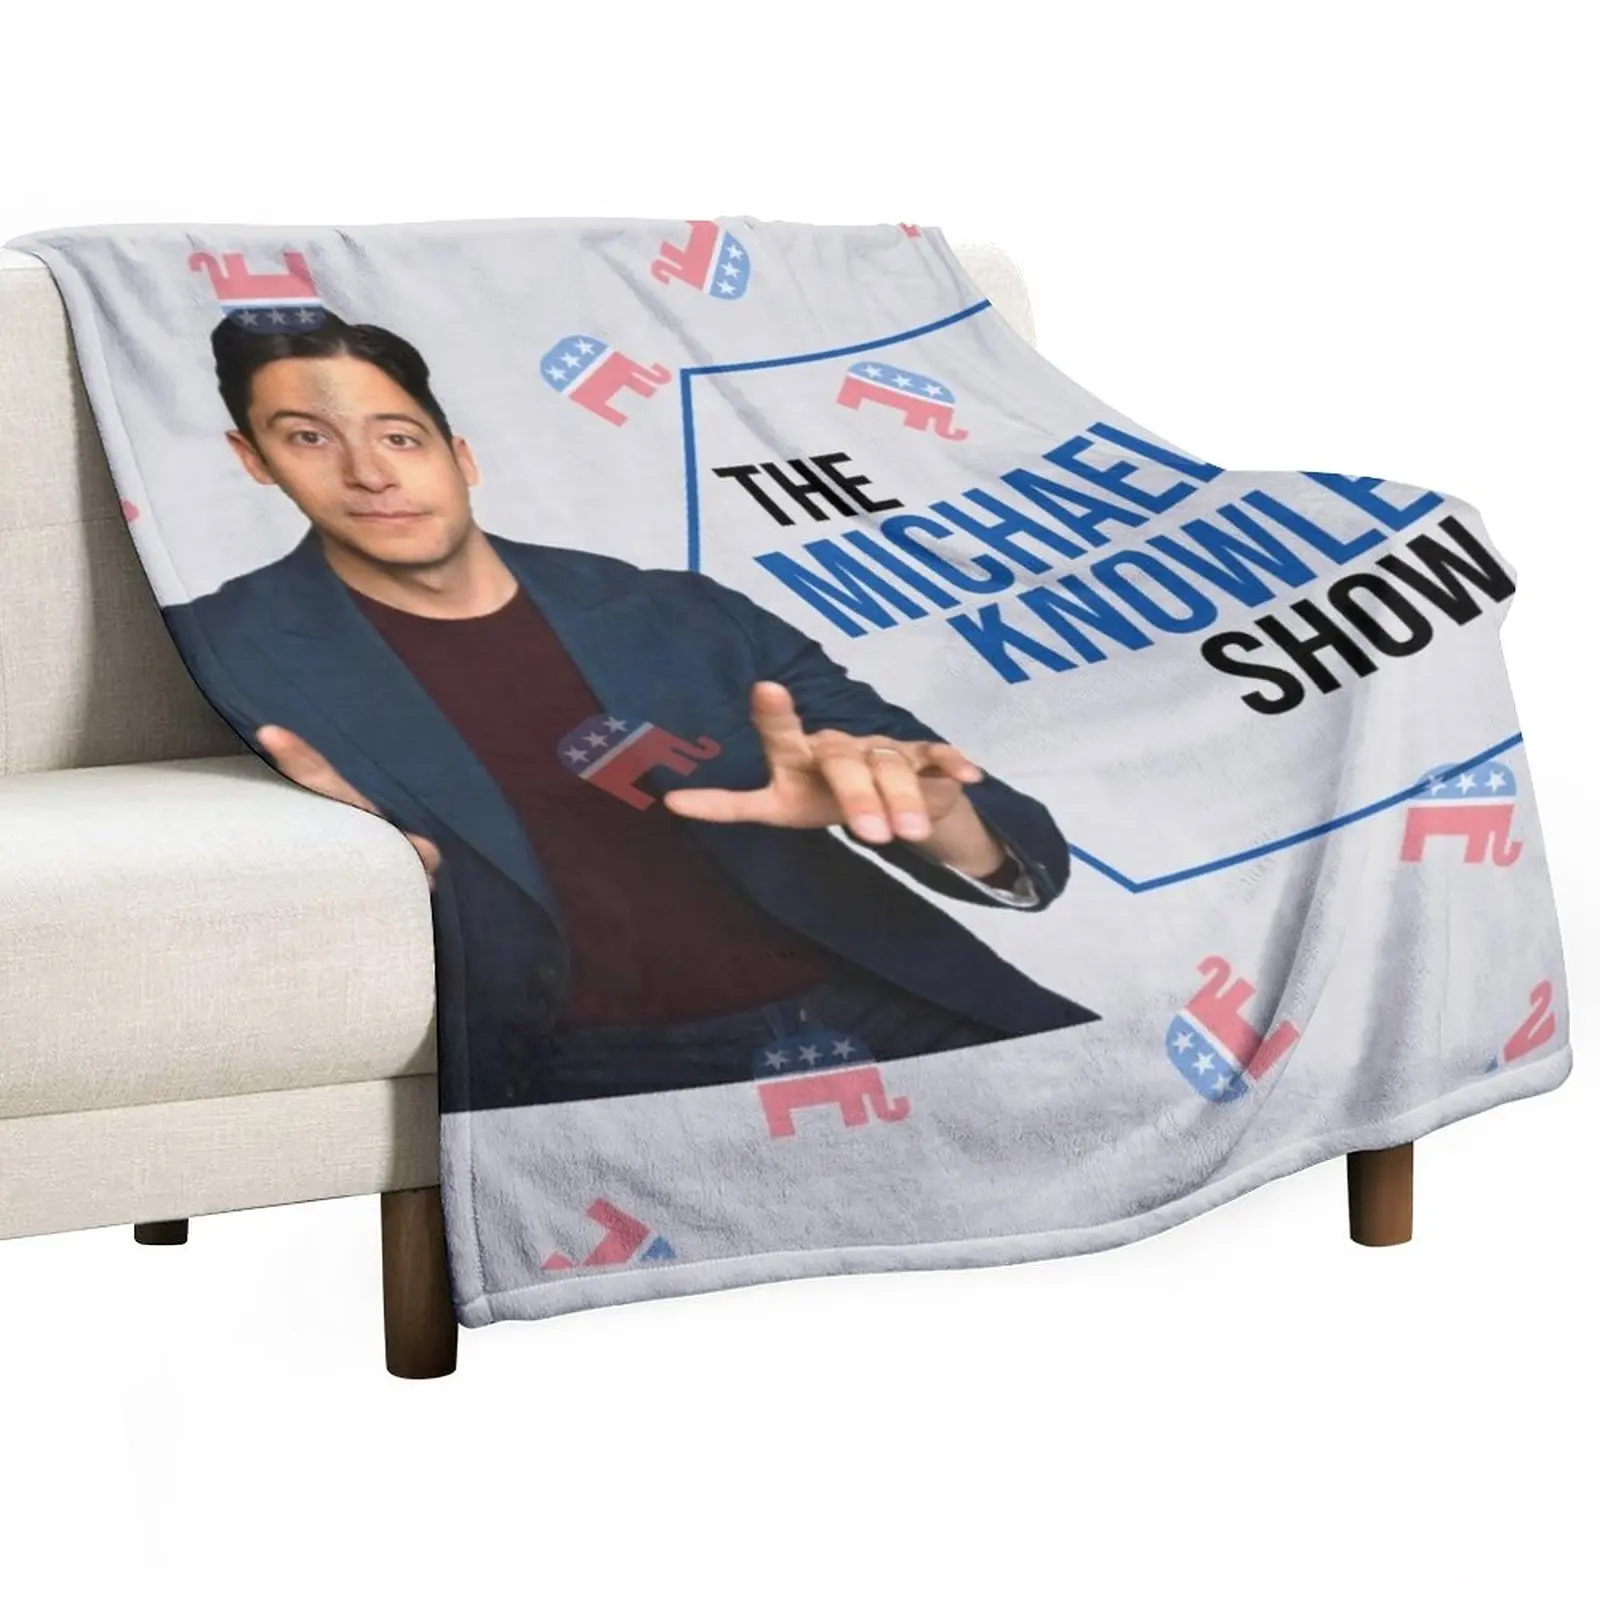 

The Michael Knowles Show Full Logo Throw Blanket Furry Blankets Flannel Fabric Bed covers Soft Big Blanket